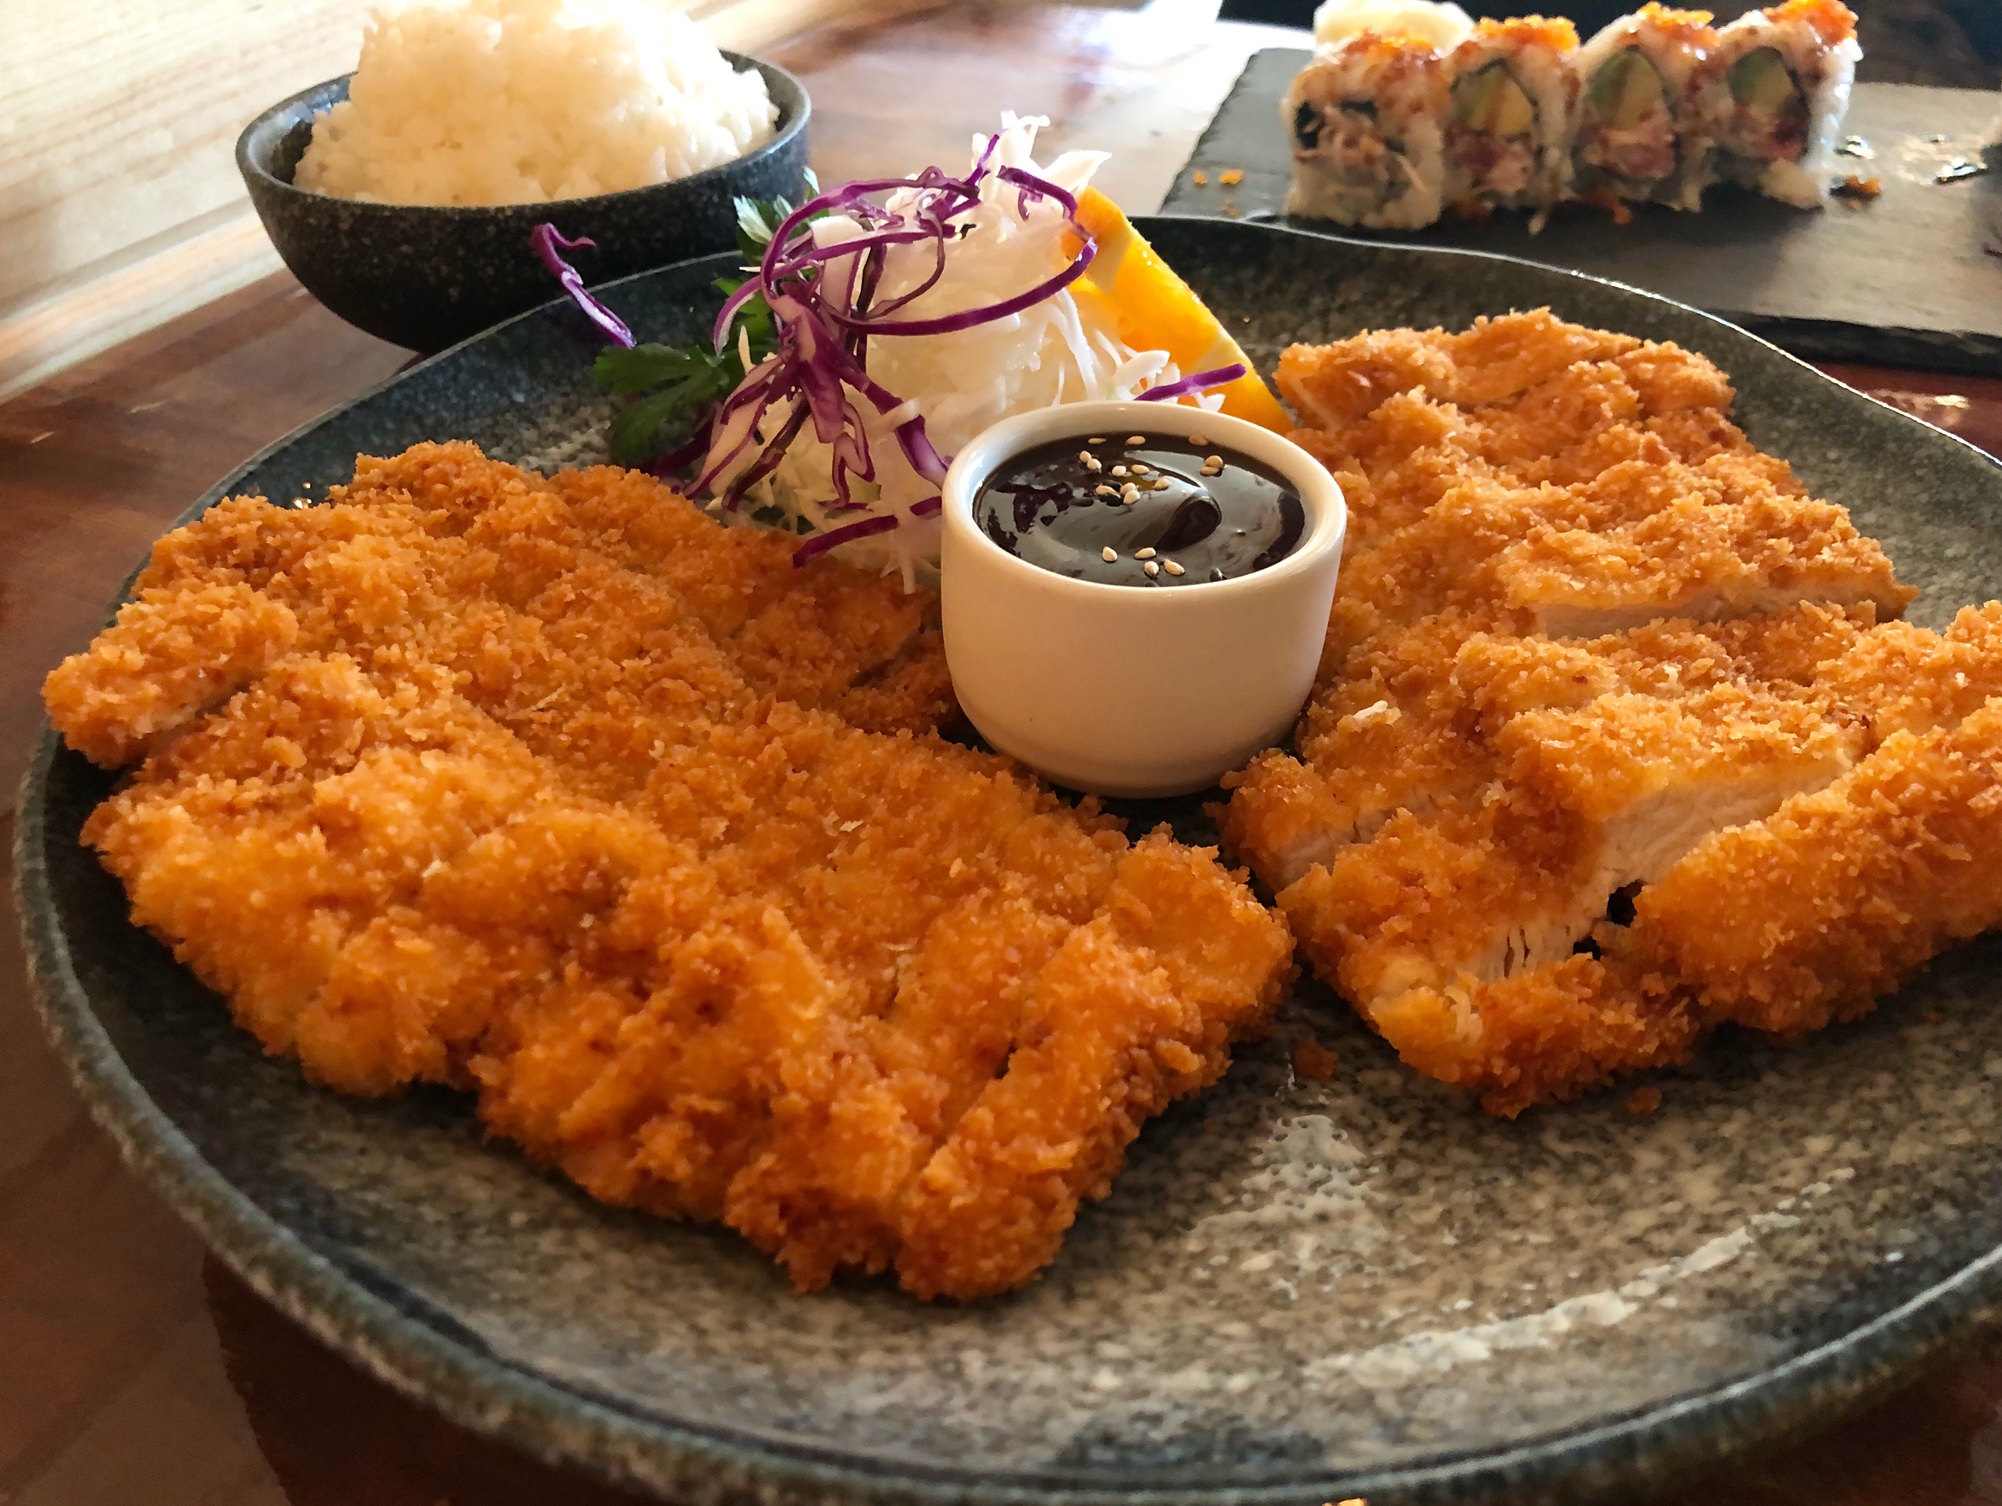 On a gray speckled plate, there are two big pieces of panko-breaded chicken with a small dipping sauce in the middle. Photo by Alyssa Buckley.